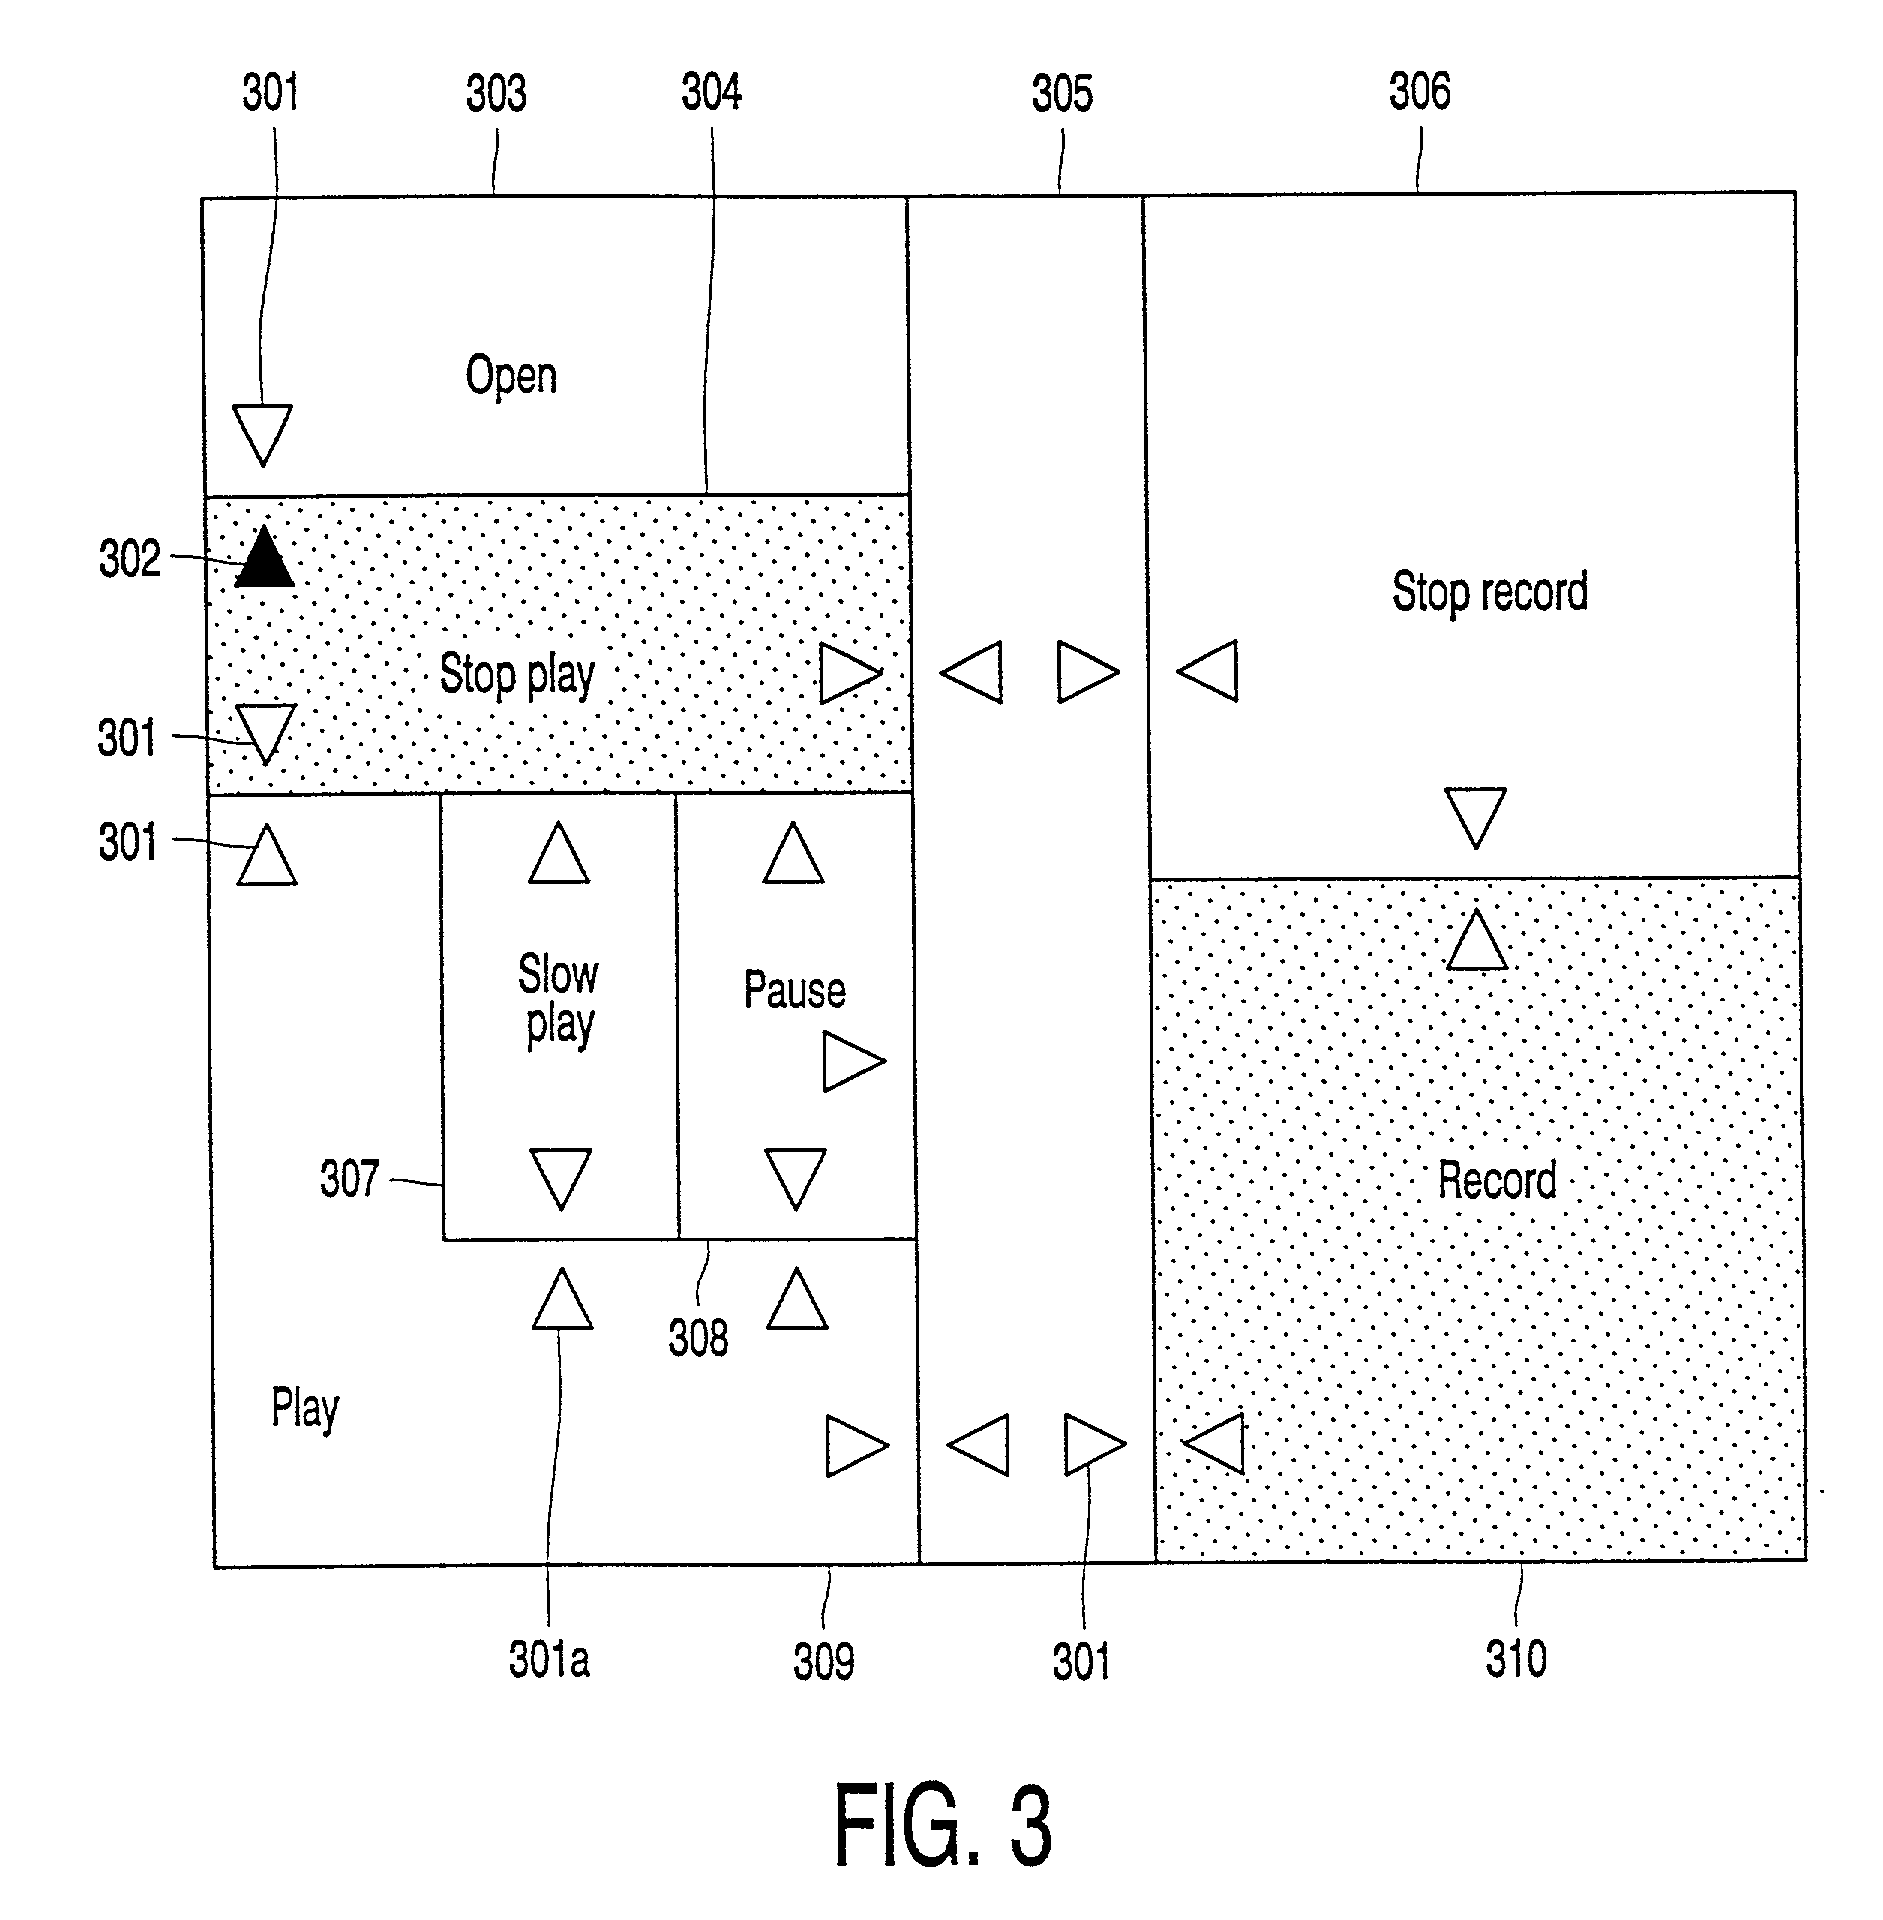 Method of operating an appliance